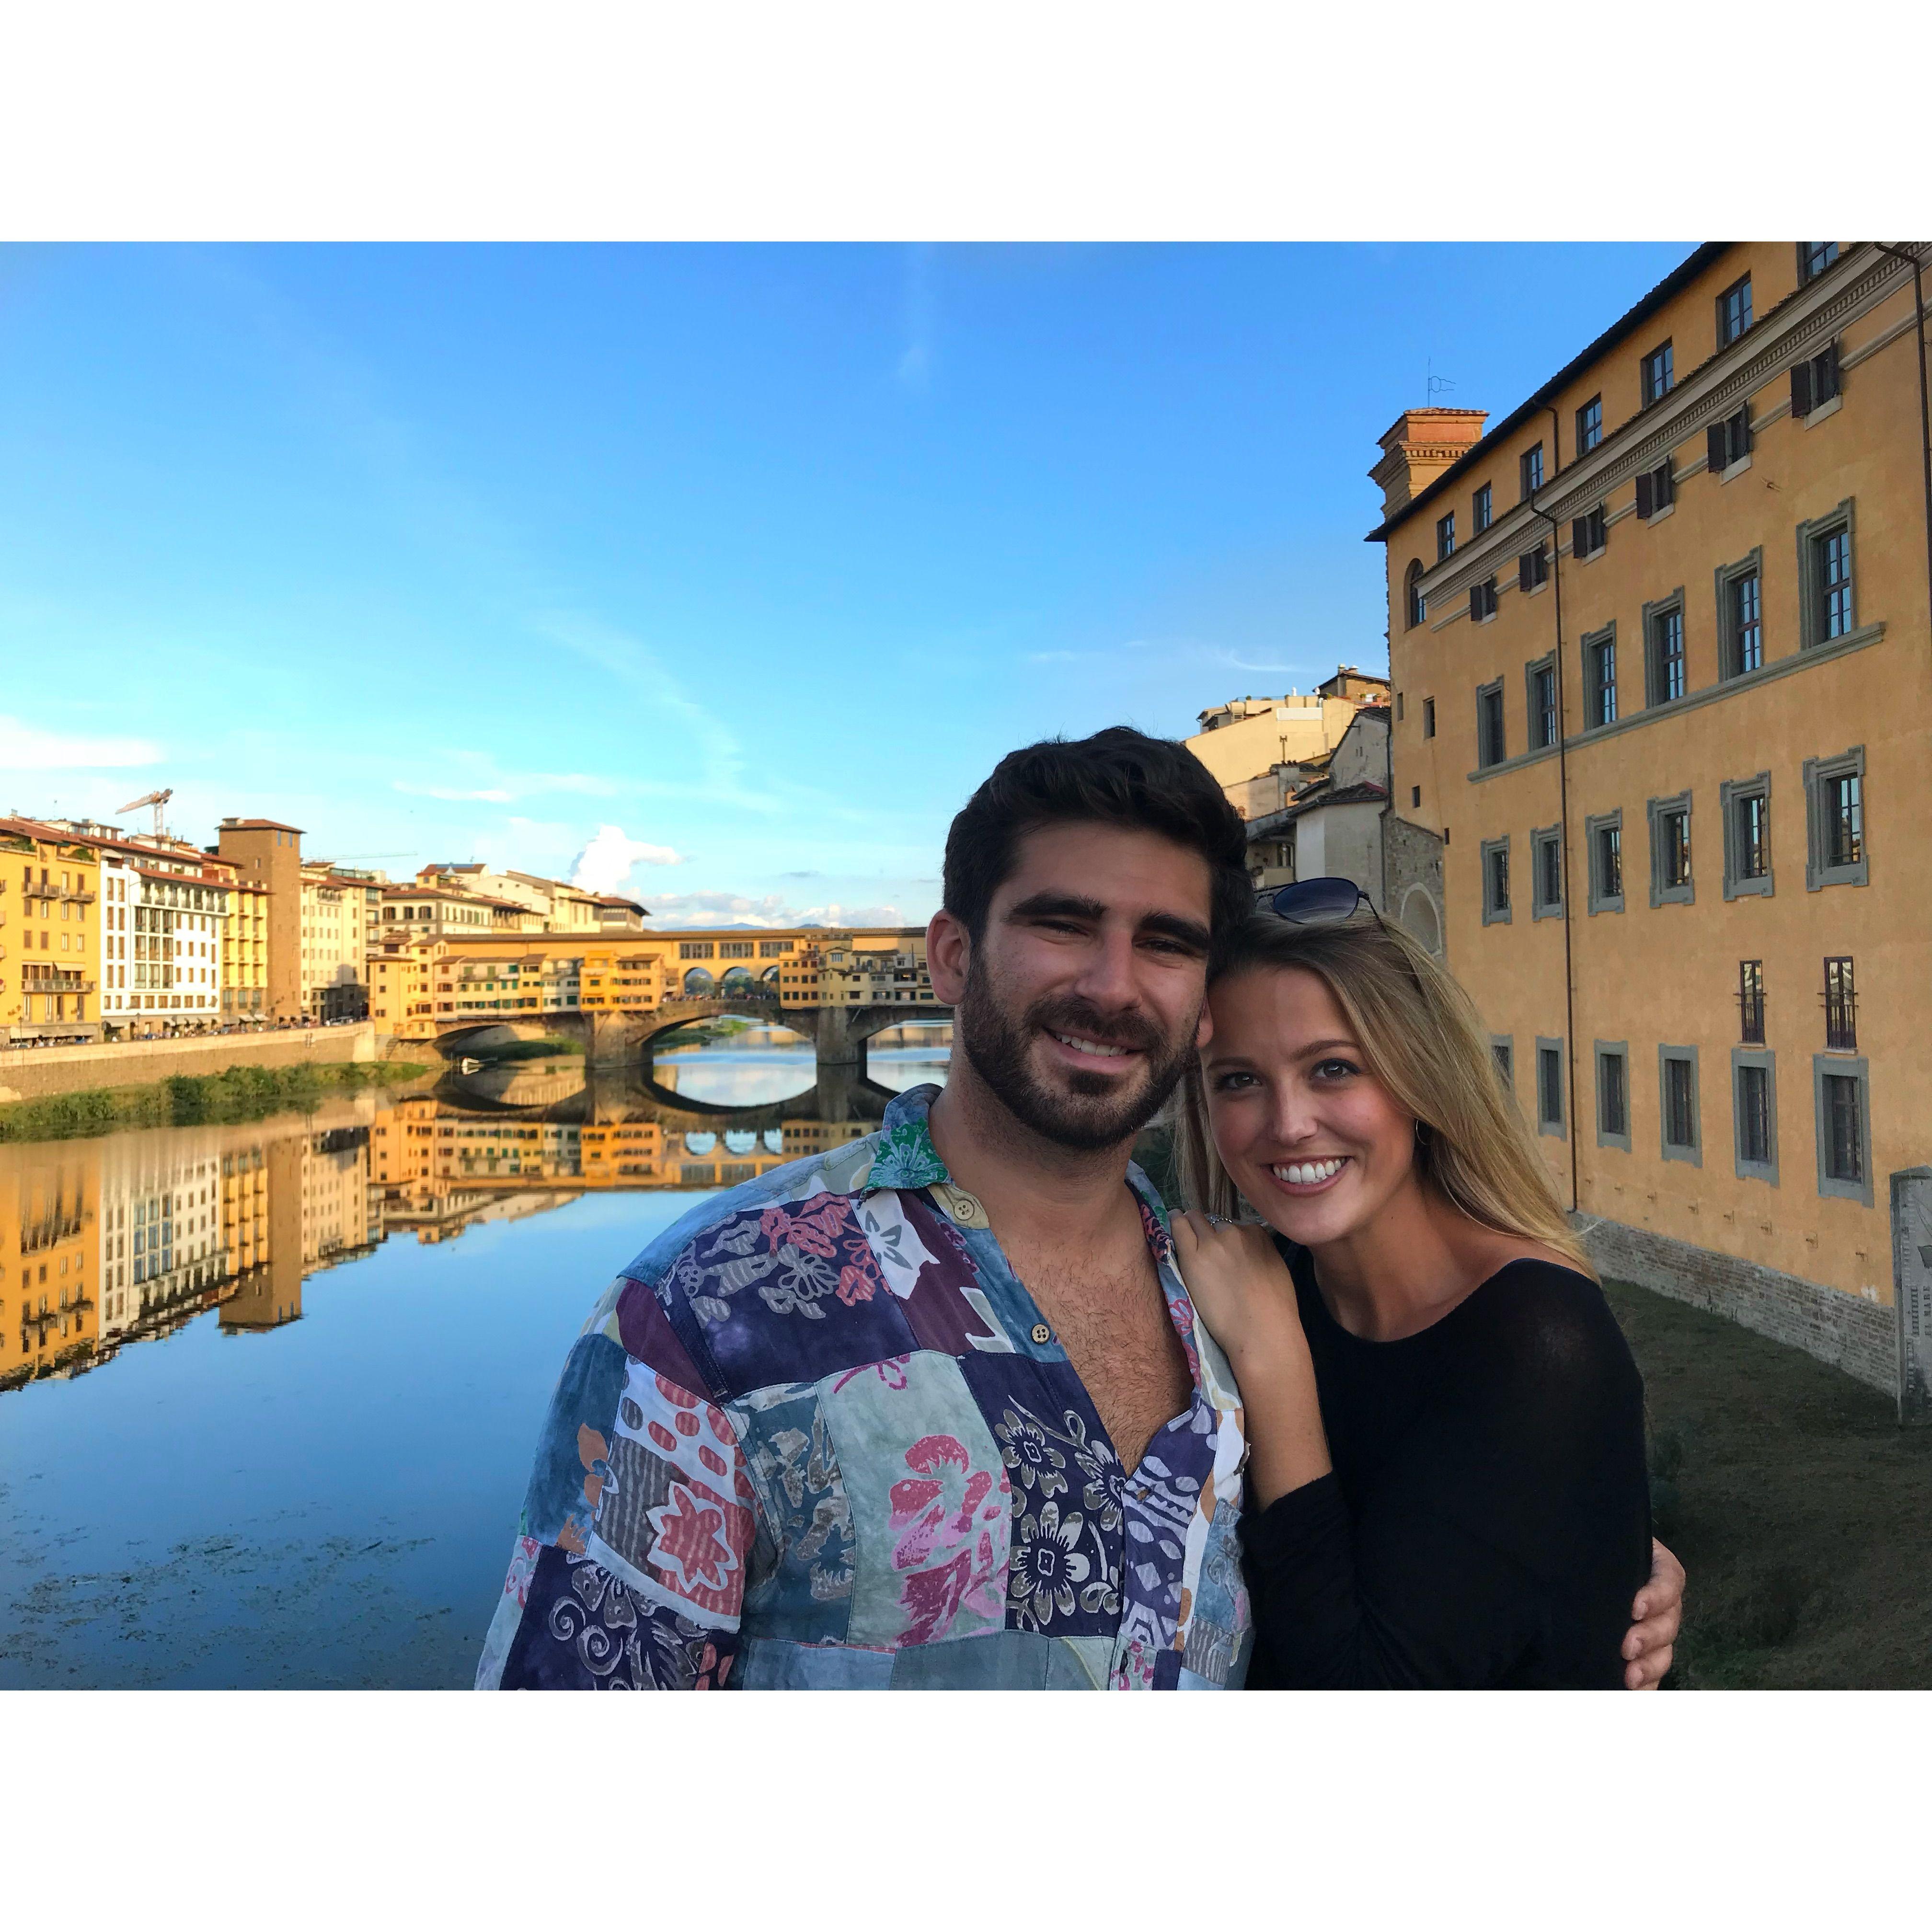 Our first vacation abroad was to Italy in 2017. Perks of dating a flight attendant!